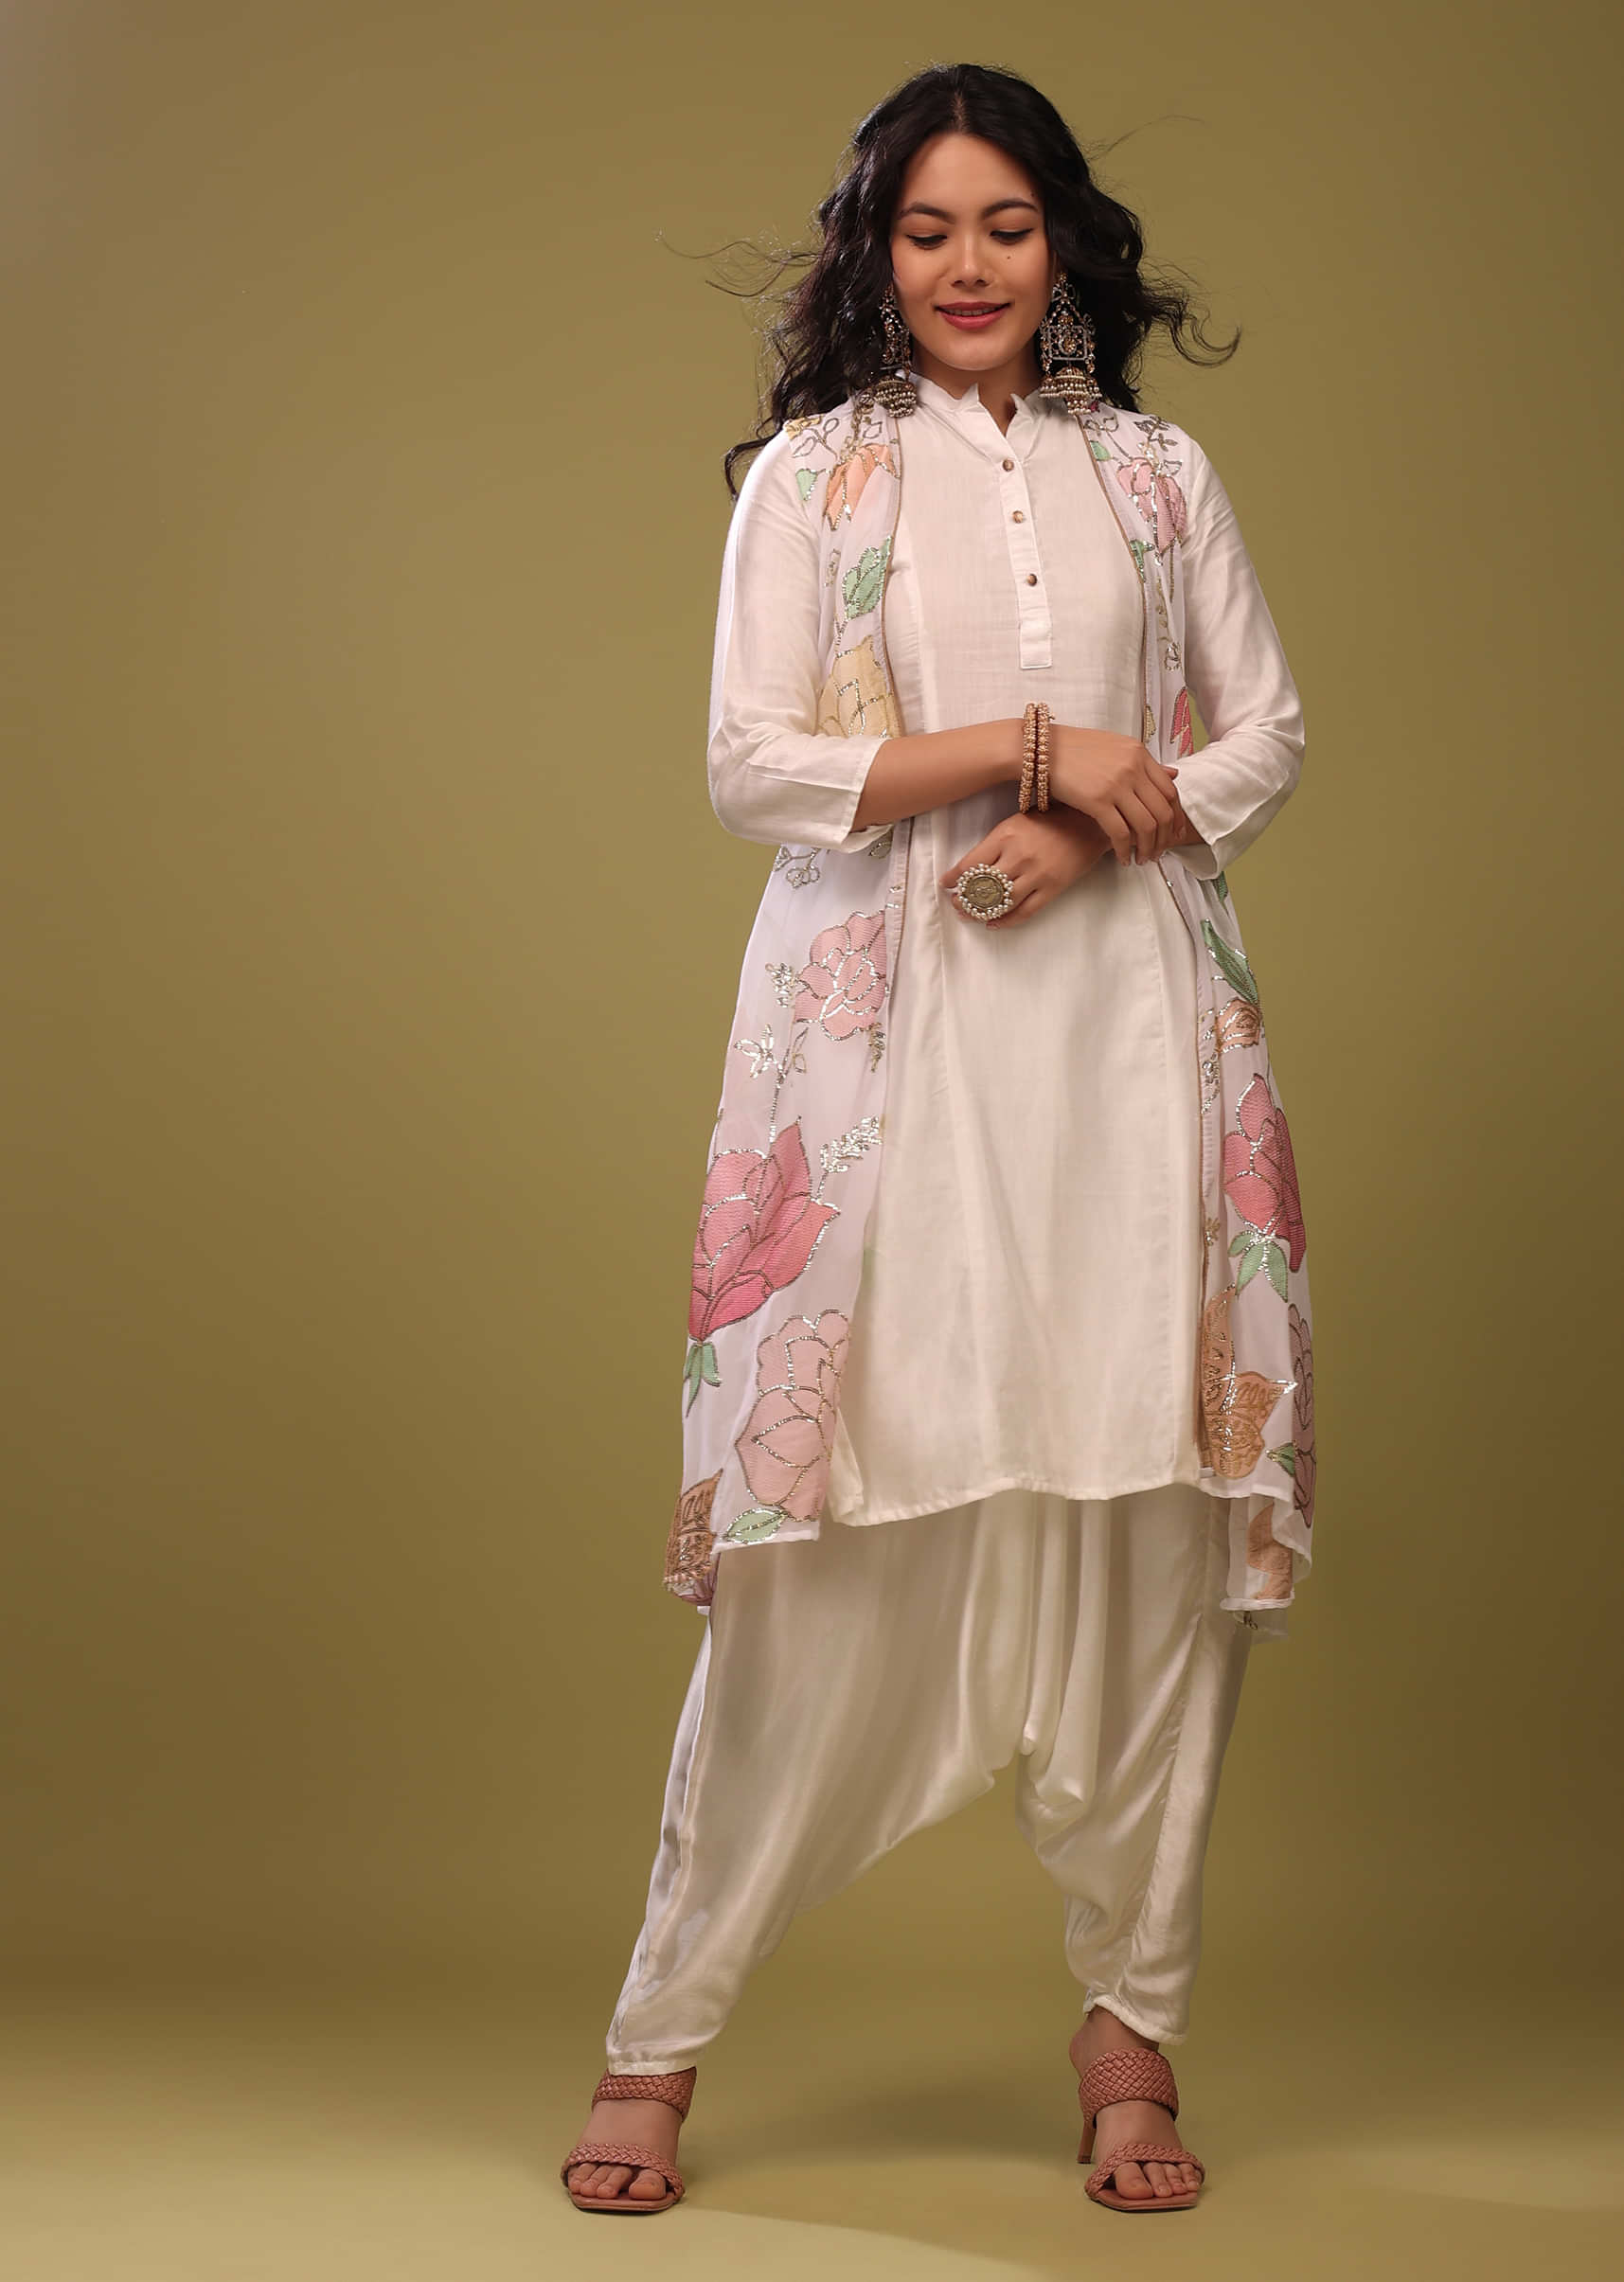 Festive Bright White Princess Kurta With Cowl Pants And An Embroidered Floral Jacket